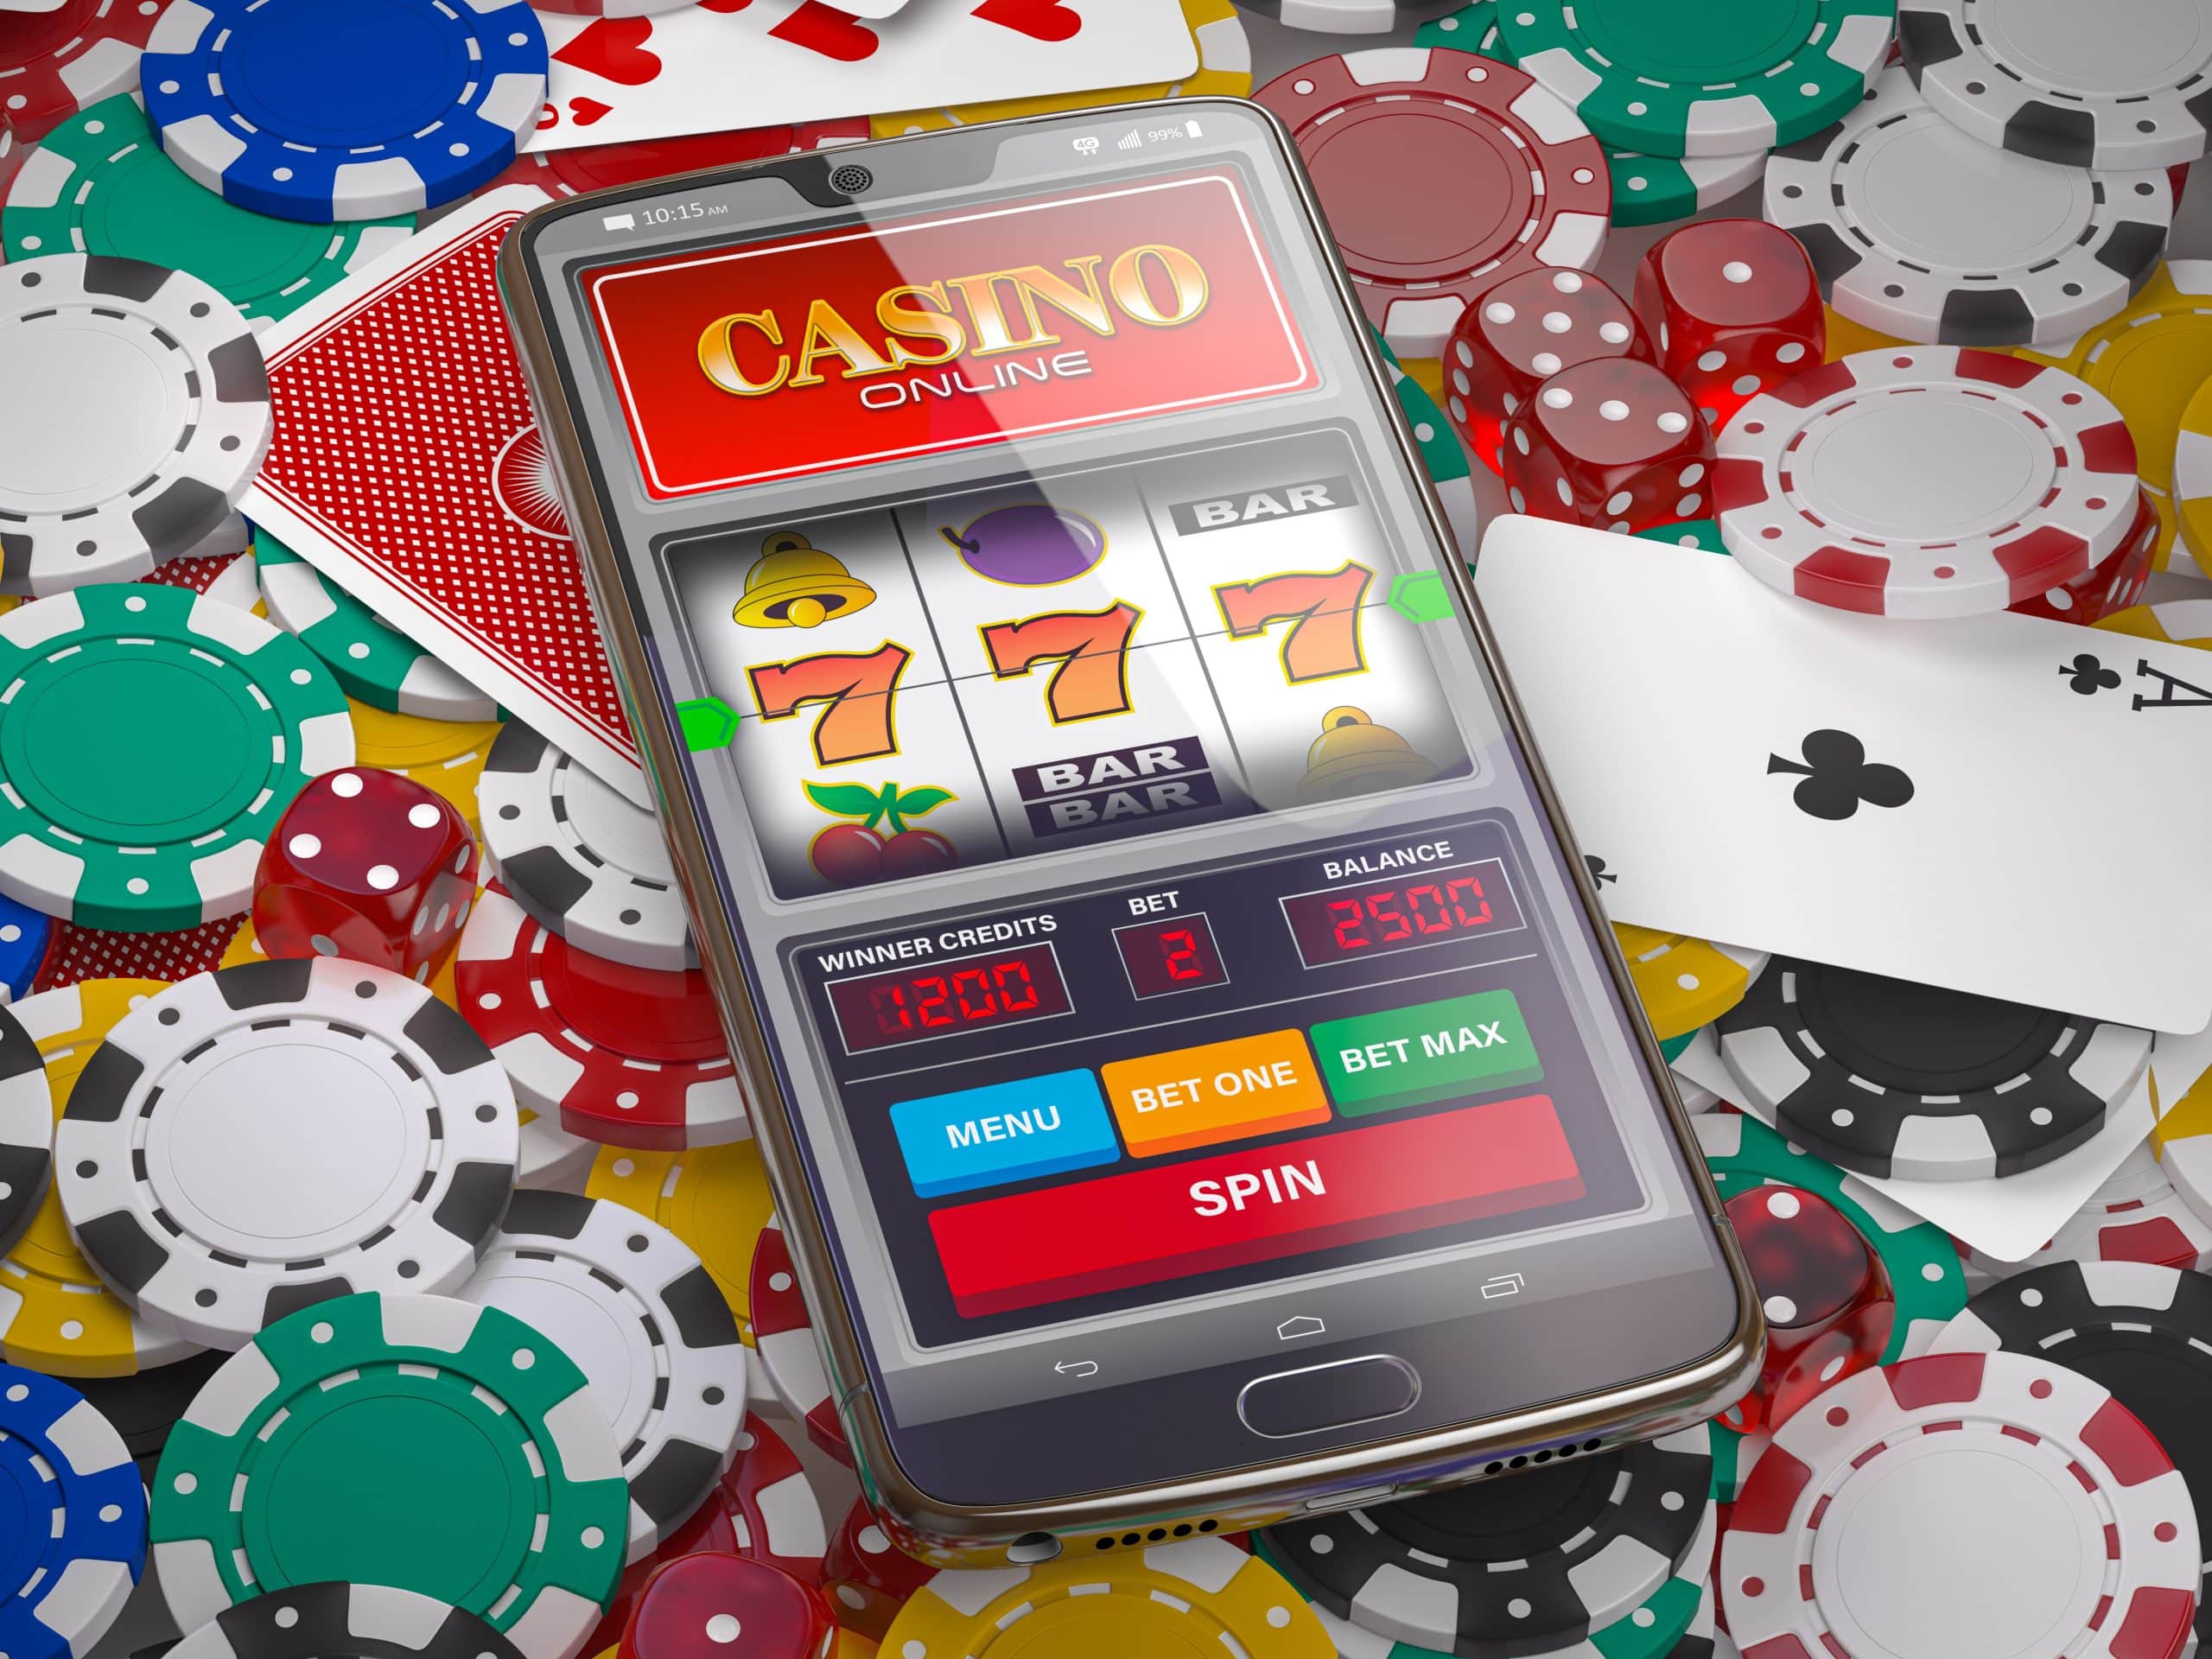 Mobile Slot Apps Reviewed: Gaming on the Go